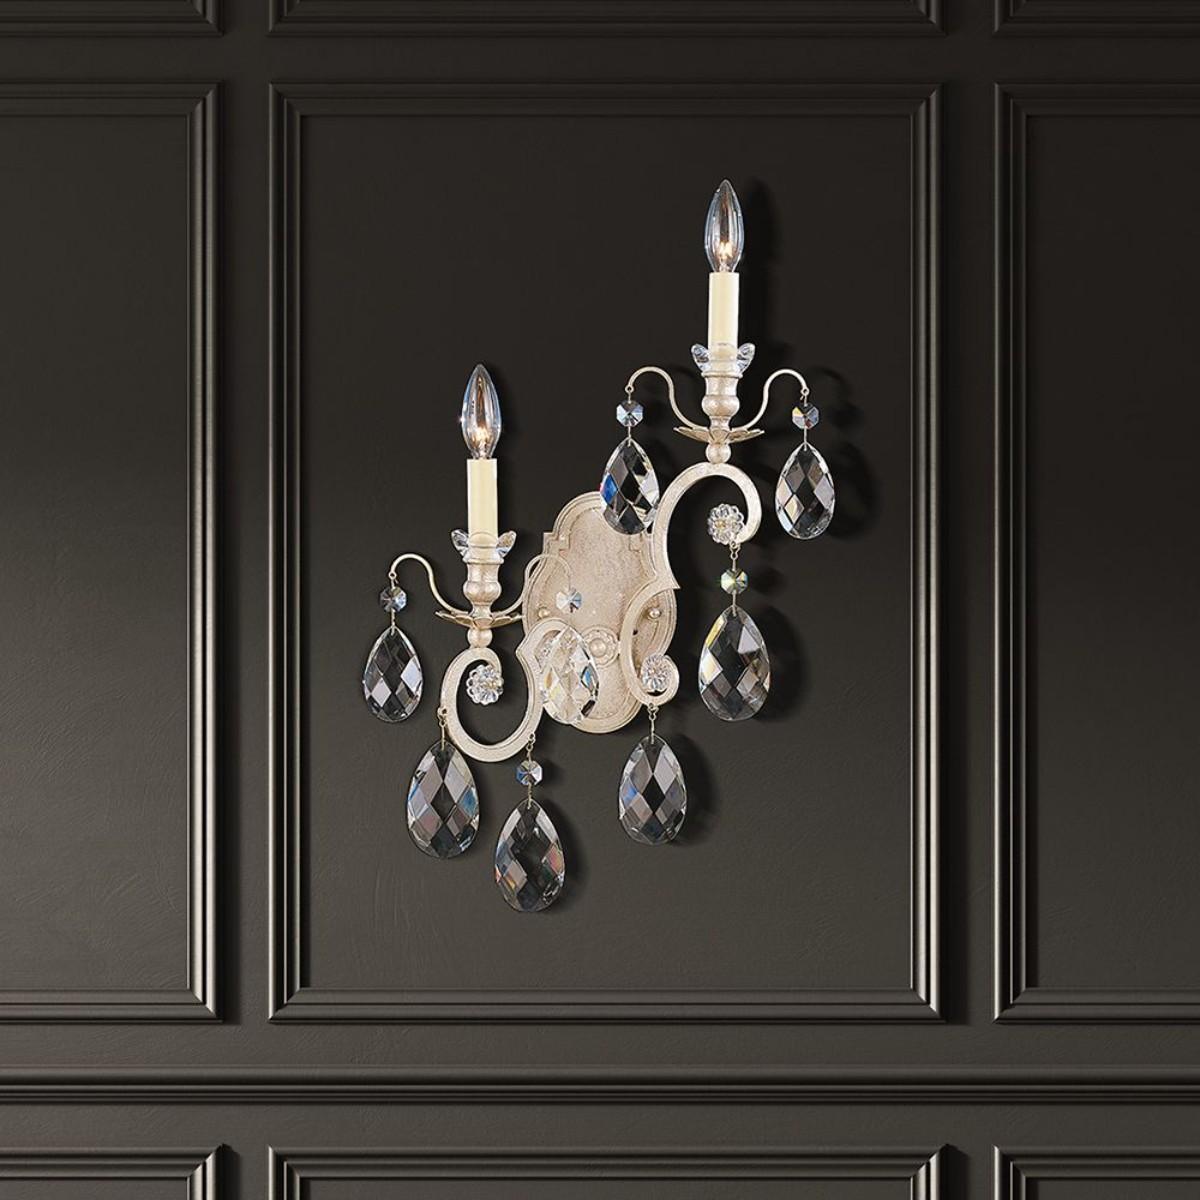 Renaissance 23 inch Armed Wall Sconce